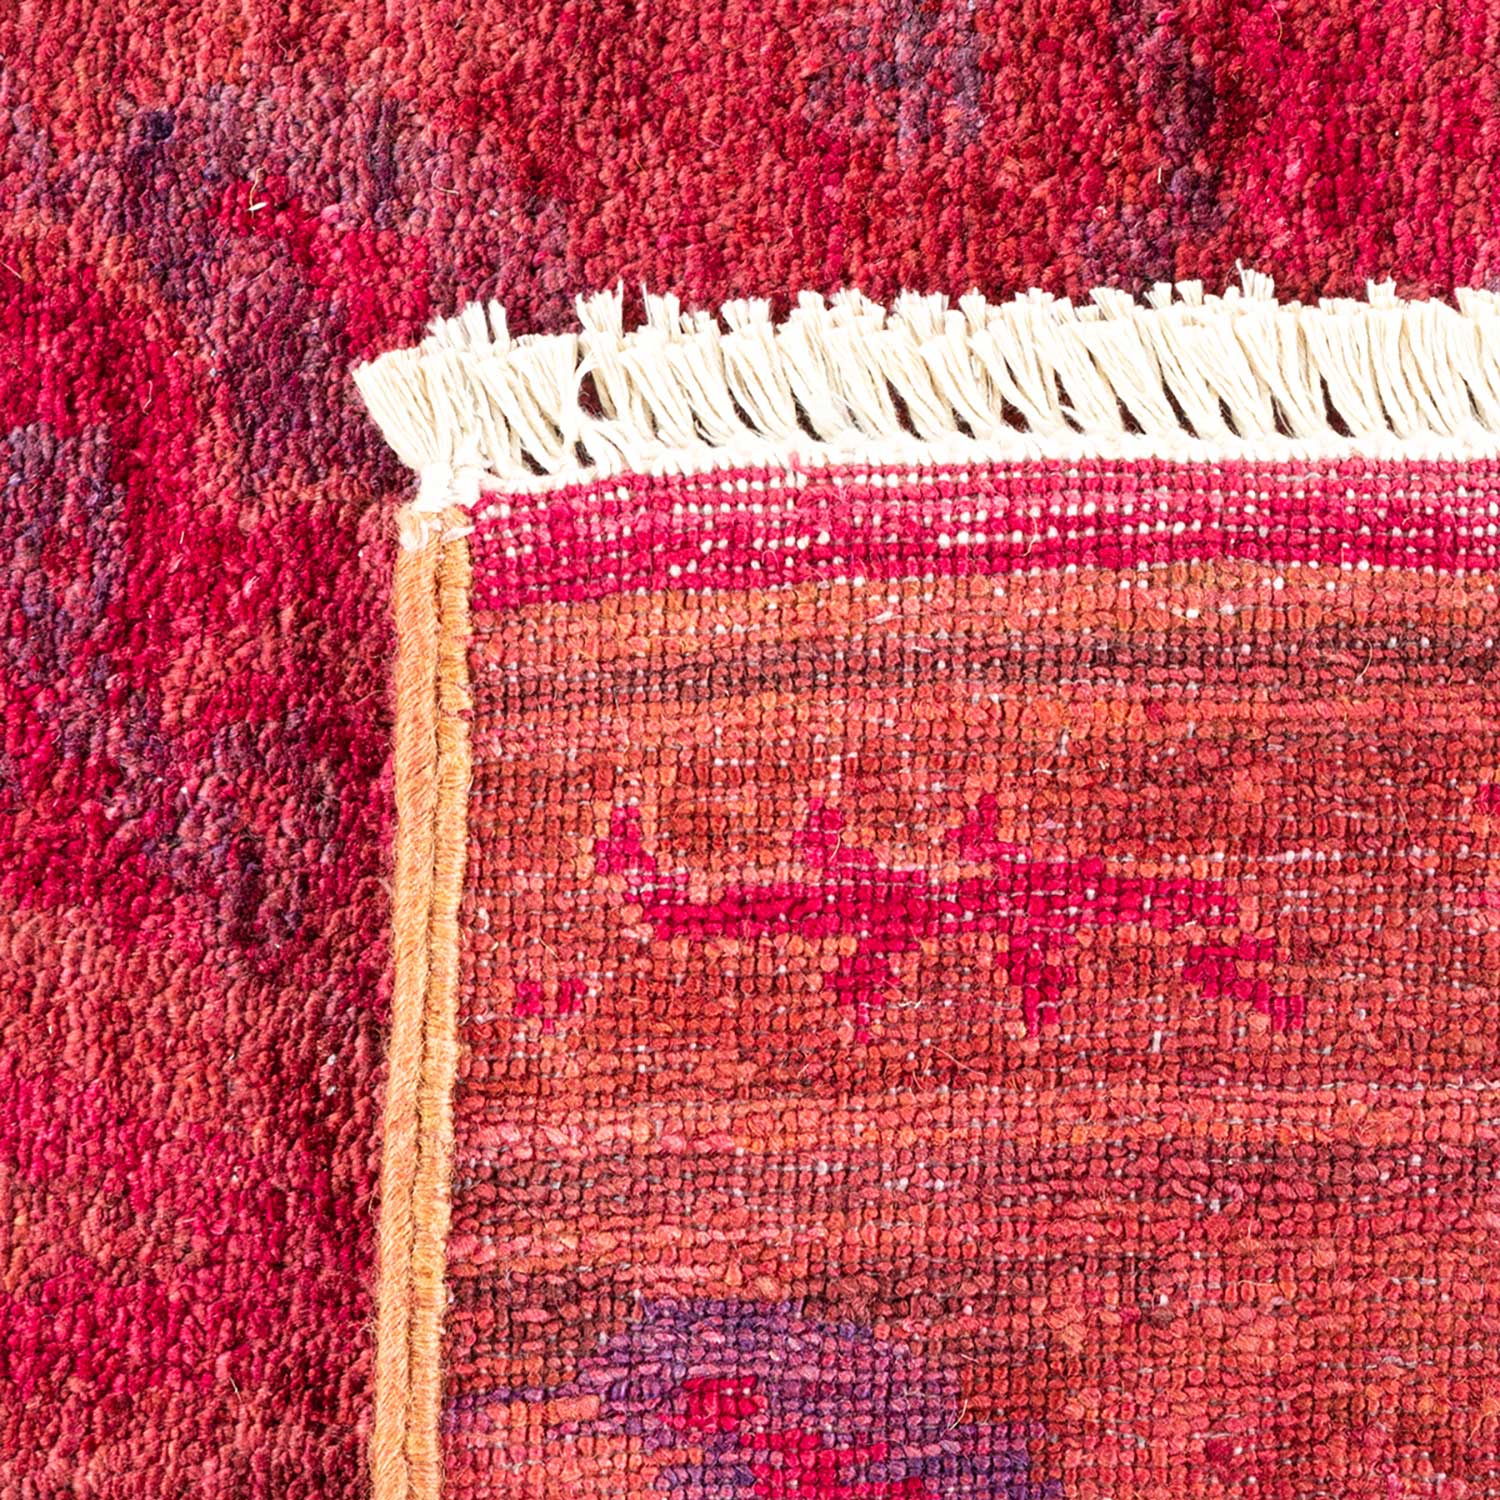 Close-up of a high-quality, handcrafted rug with intricate red patterns